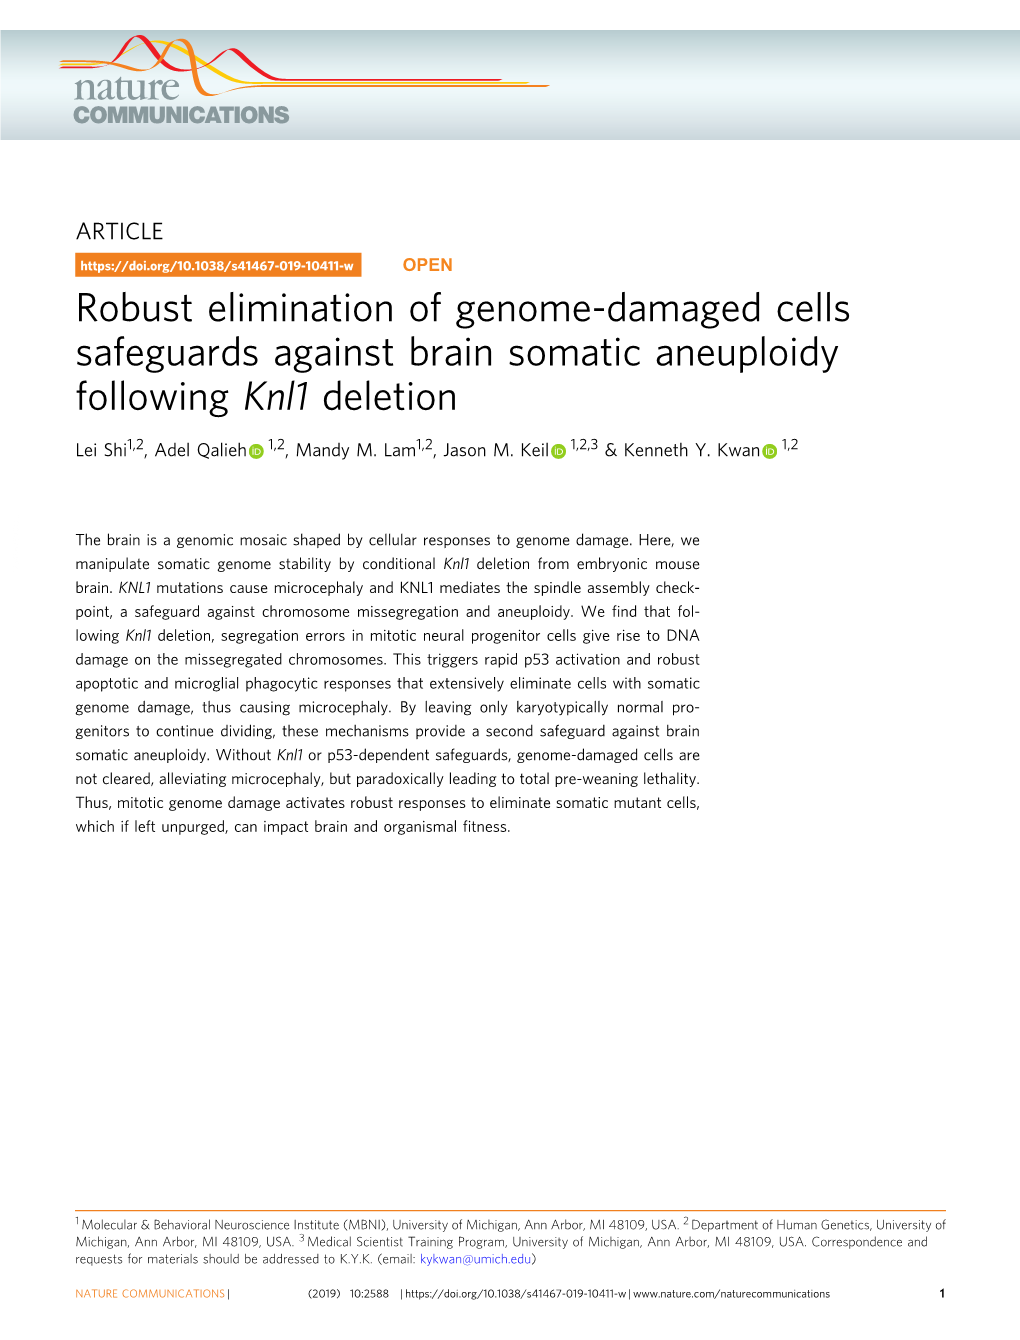 Robust Elimination of Genome-Damaged Cells Safeguards Against Brain Somatic Aneuploidy Following Knl1 Deletion